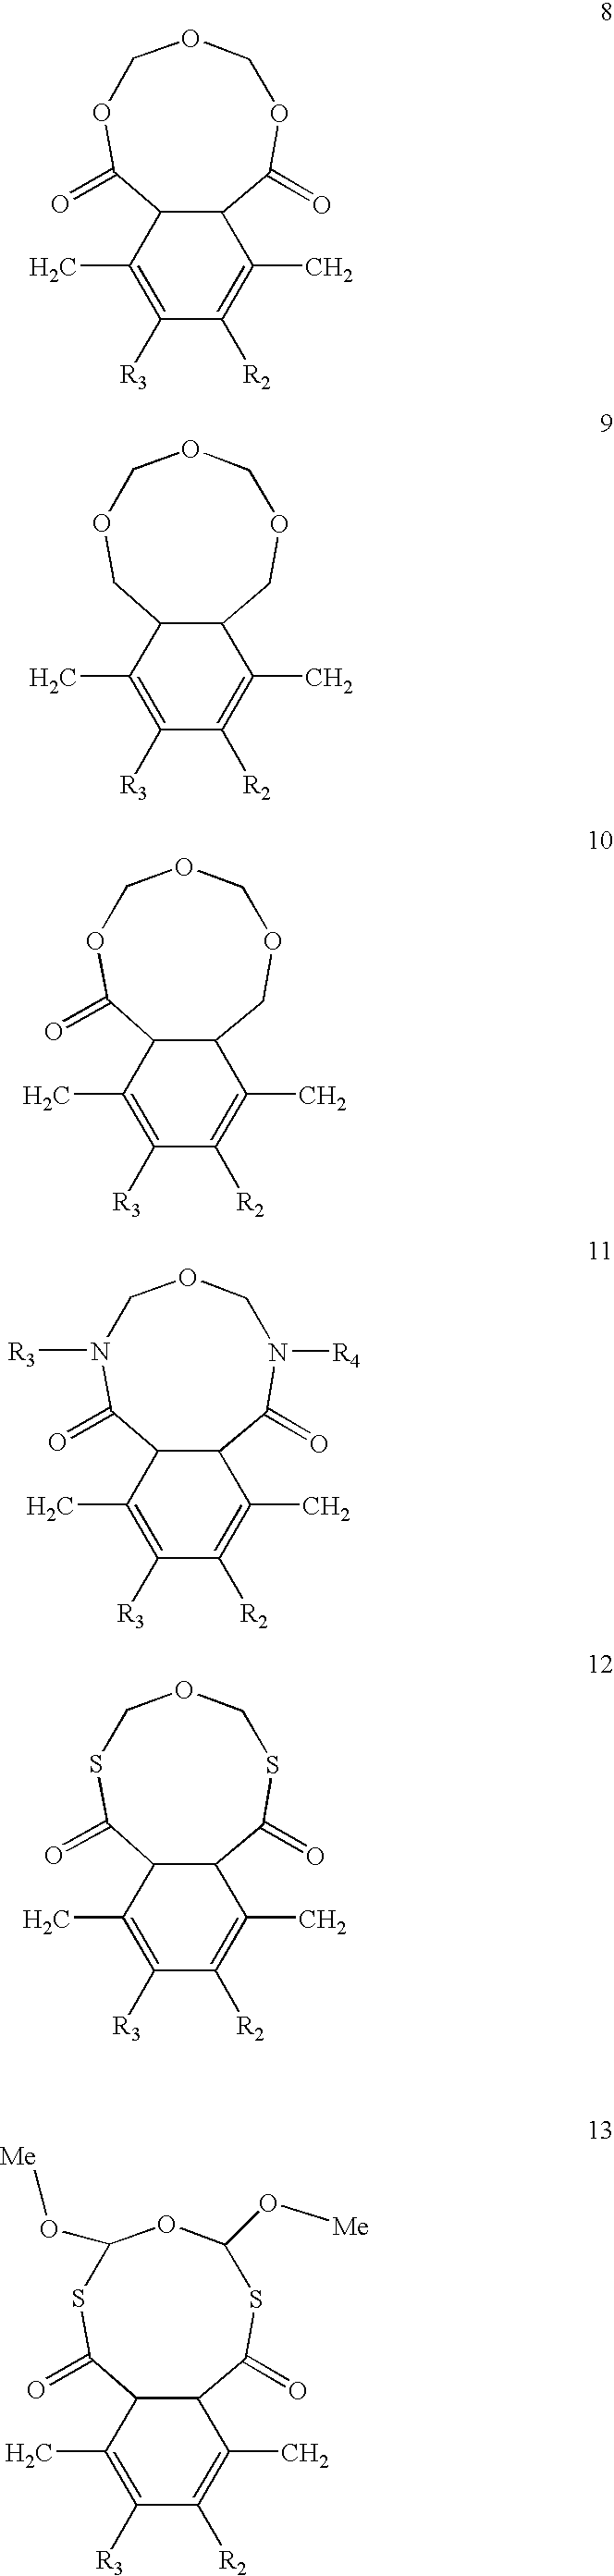 Fabrication of surfaces with reduced protein adsorption and/or cell adhesion